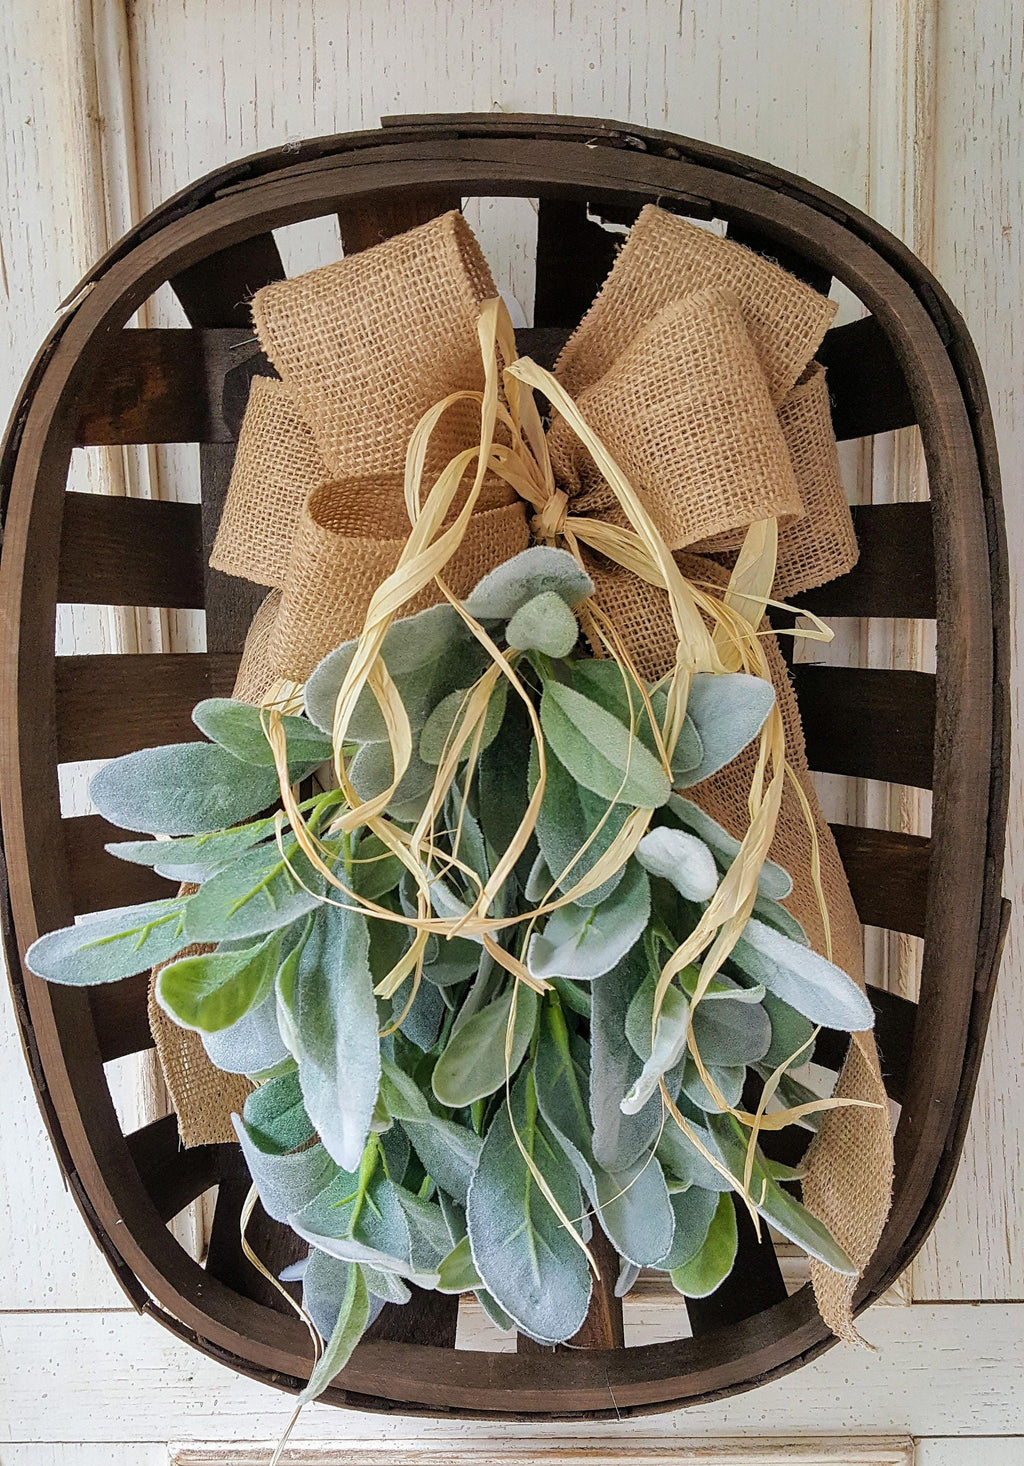 Tobacco Basket Lambs Ear, Tobacco Baskets, Farmhouse decor, fixer upper, gifts for her, fall decor, front door wreath, wall decor